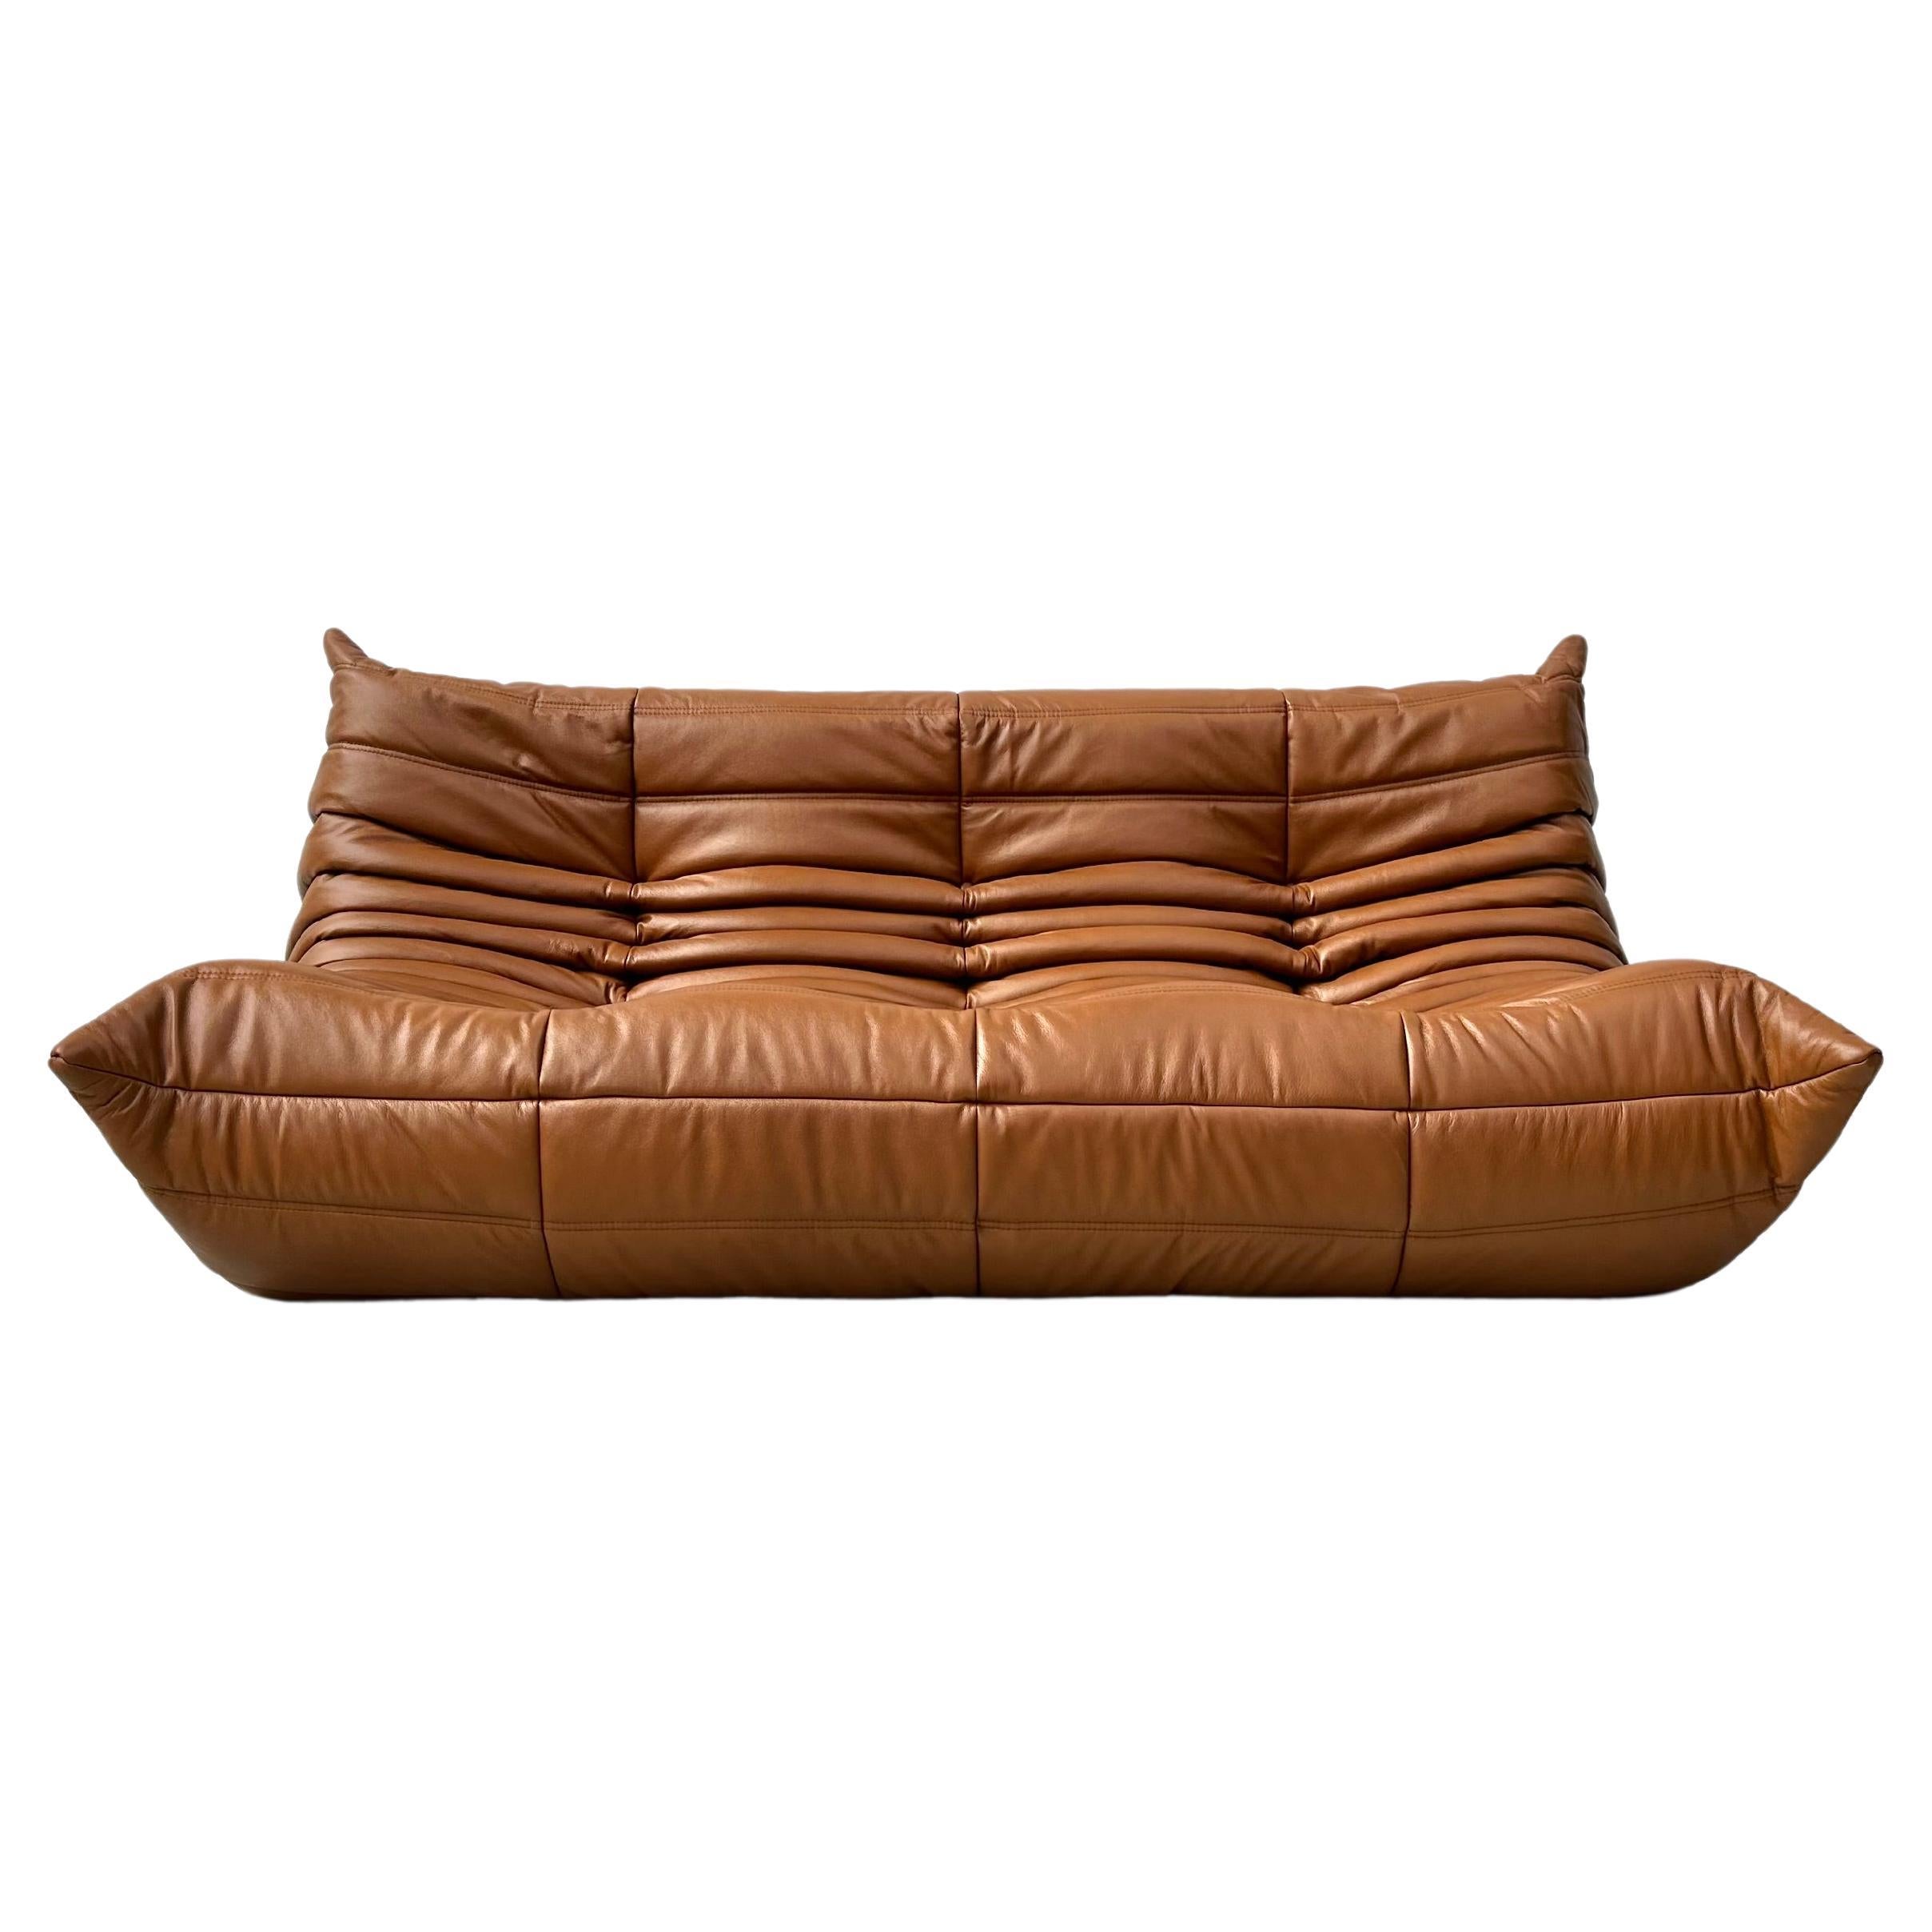 French Togo Sofa in Cognac Leather by Michel Ducaroy for Ligne Roset. For Sale